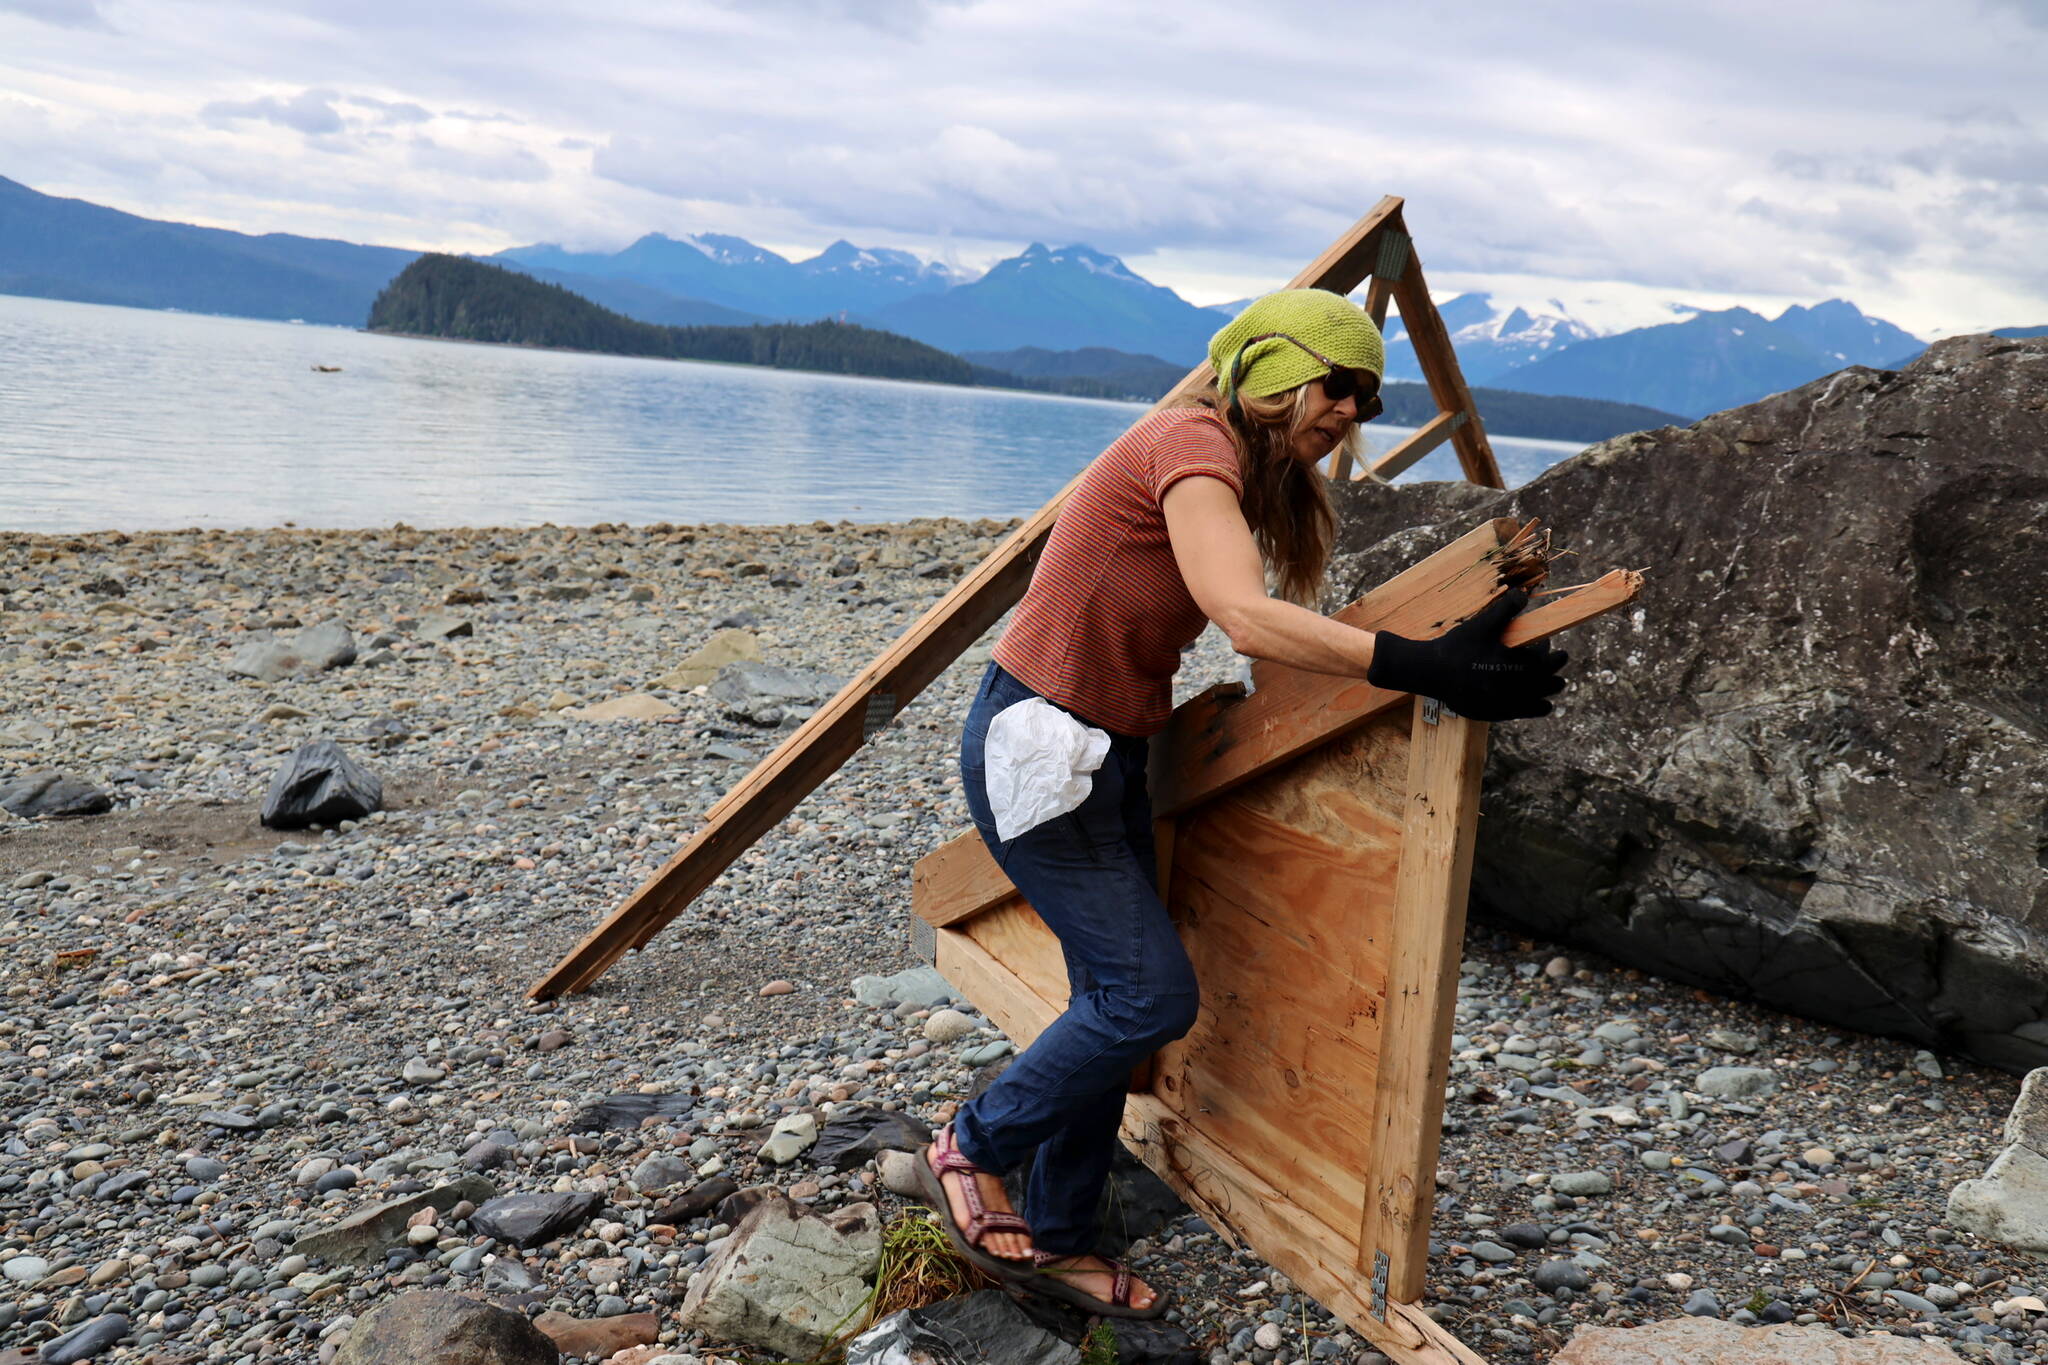 Ava Christ, who is visiting Juneau for two weeks, picks up pieces of large debris on a beach on North Douglas on Monday afternoon. Christ, who wanted to get involved with helping the community after hearing about the “tragedy” of the flooding, said she filled about four bags of trash in just a few hours of cleanup. (Clarise Larson / Juneau Empire)